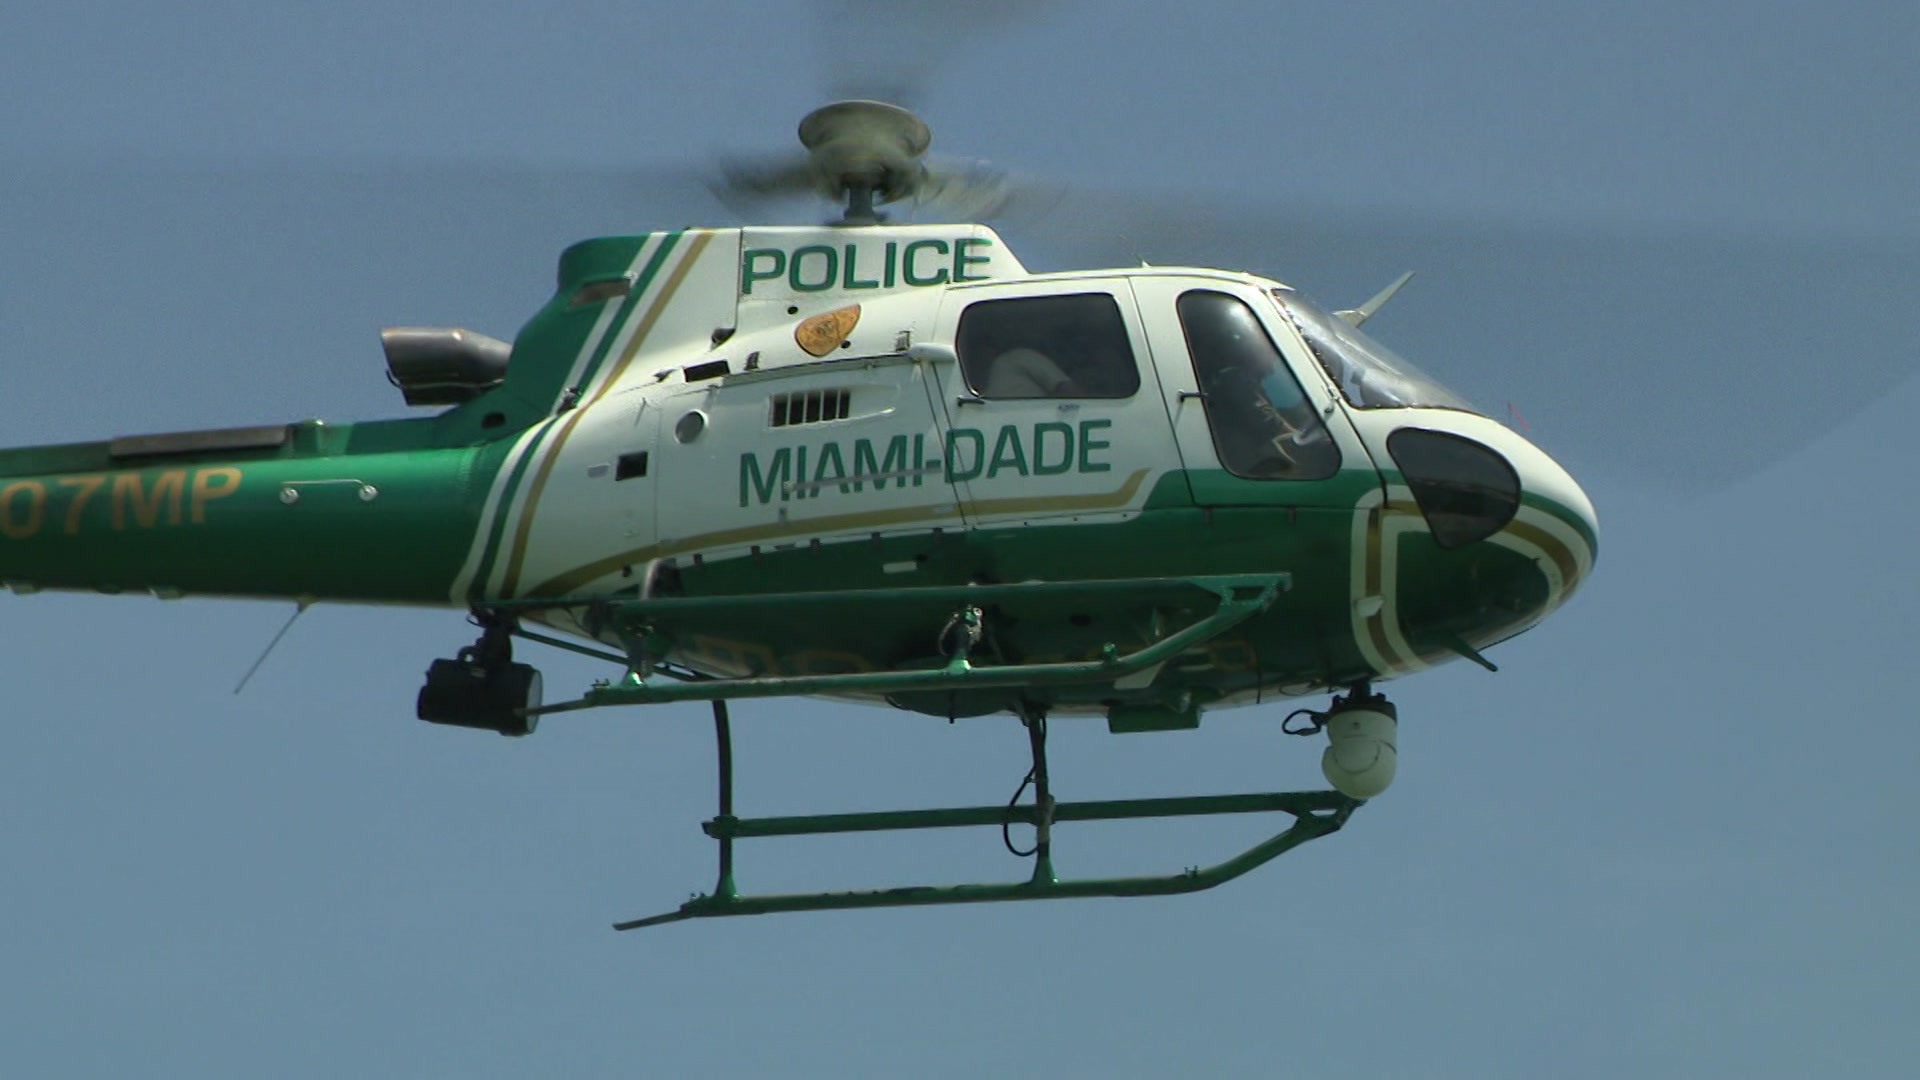 Helicopters & All, Teen Gets “Bad Boys” Dream Come True Courtesy Of Make-A-Wish